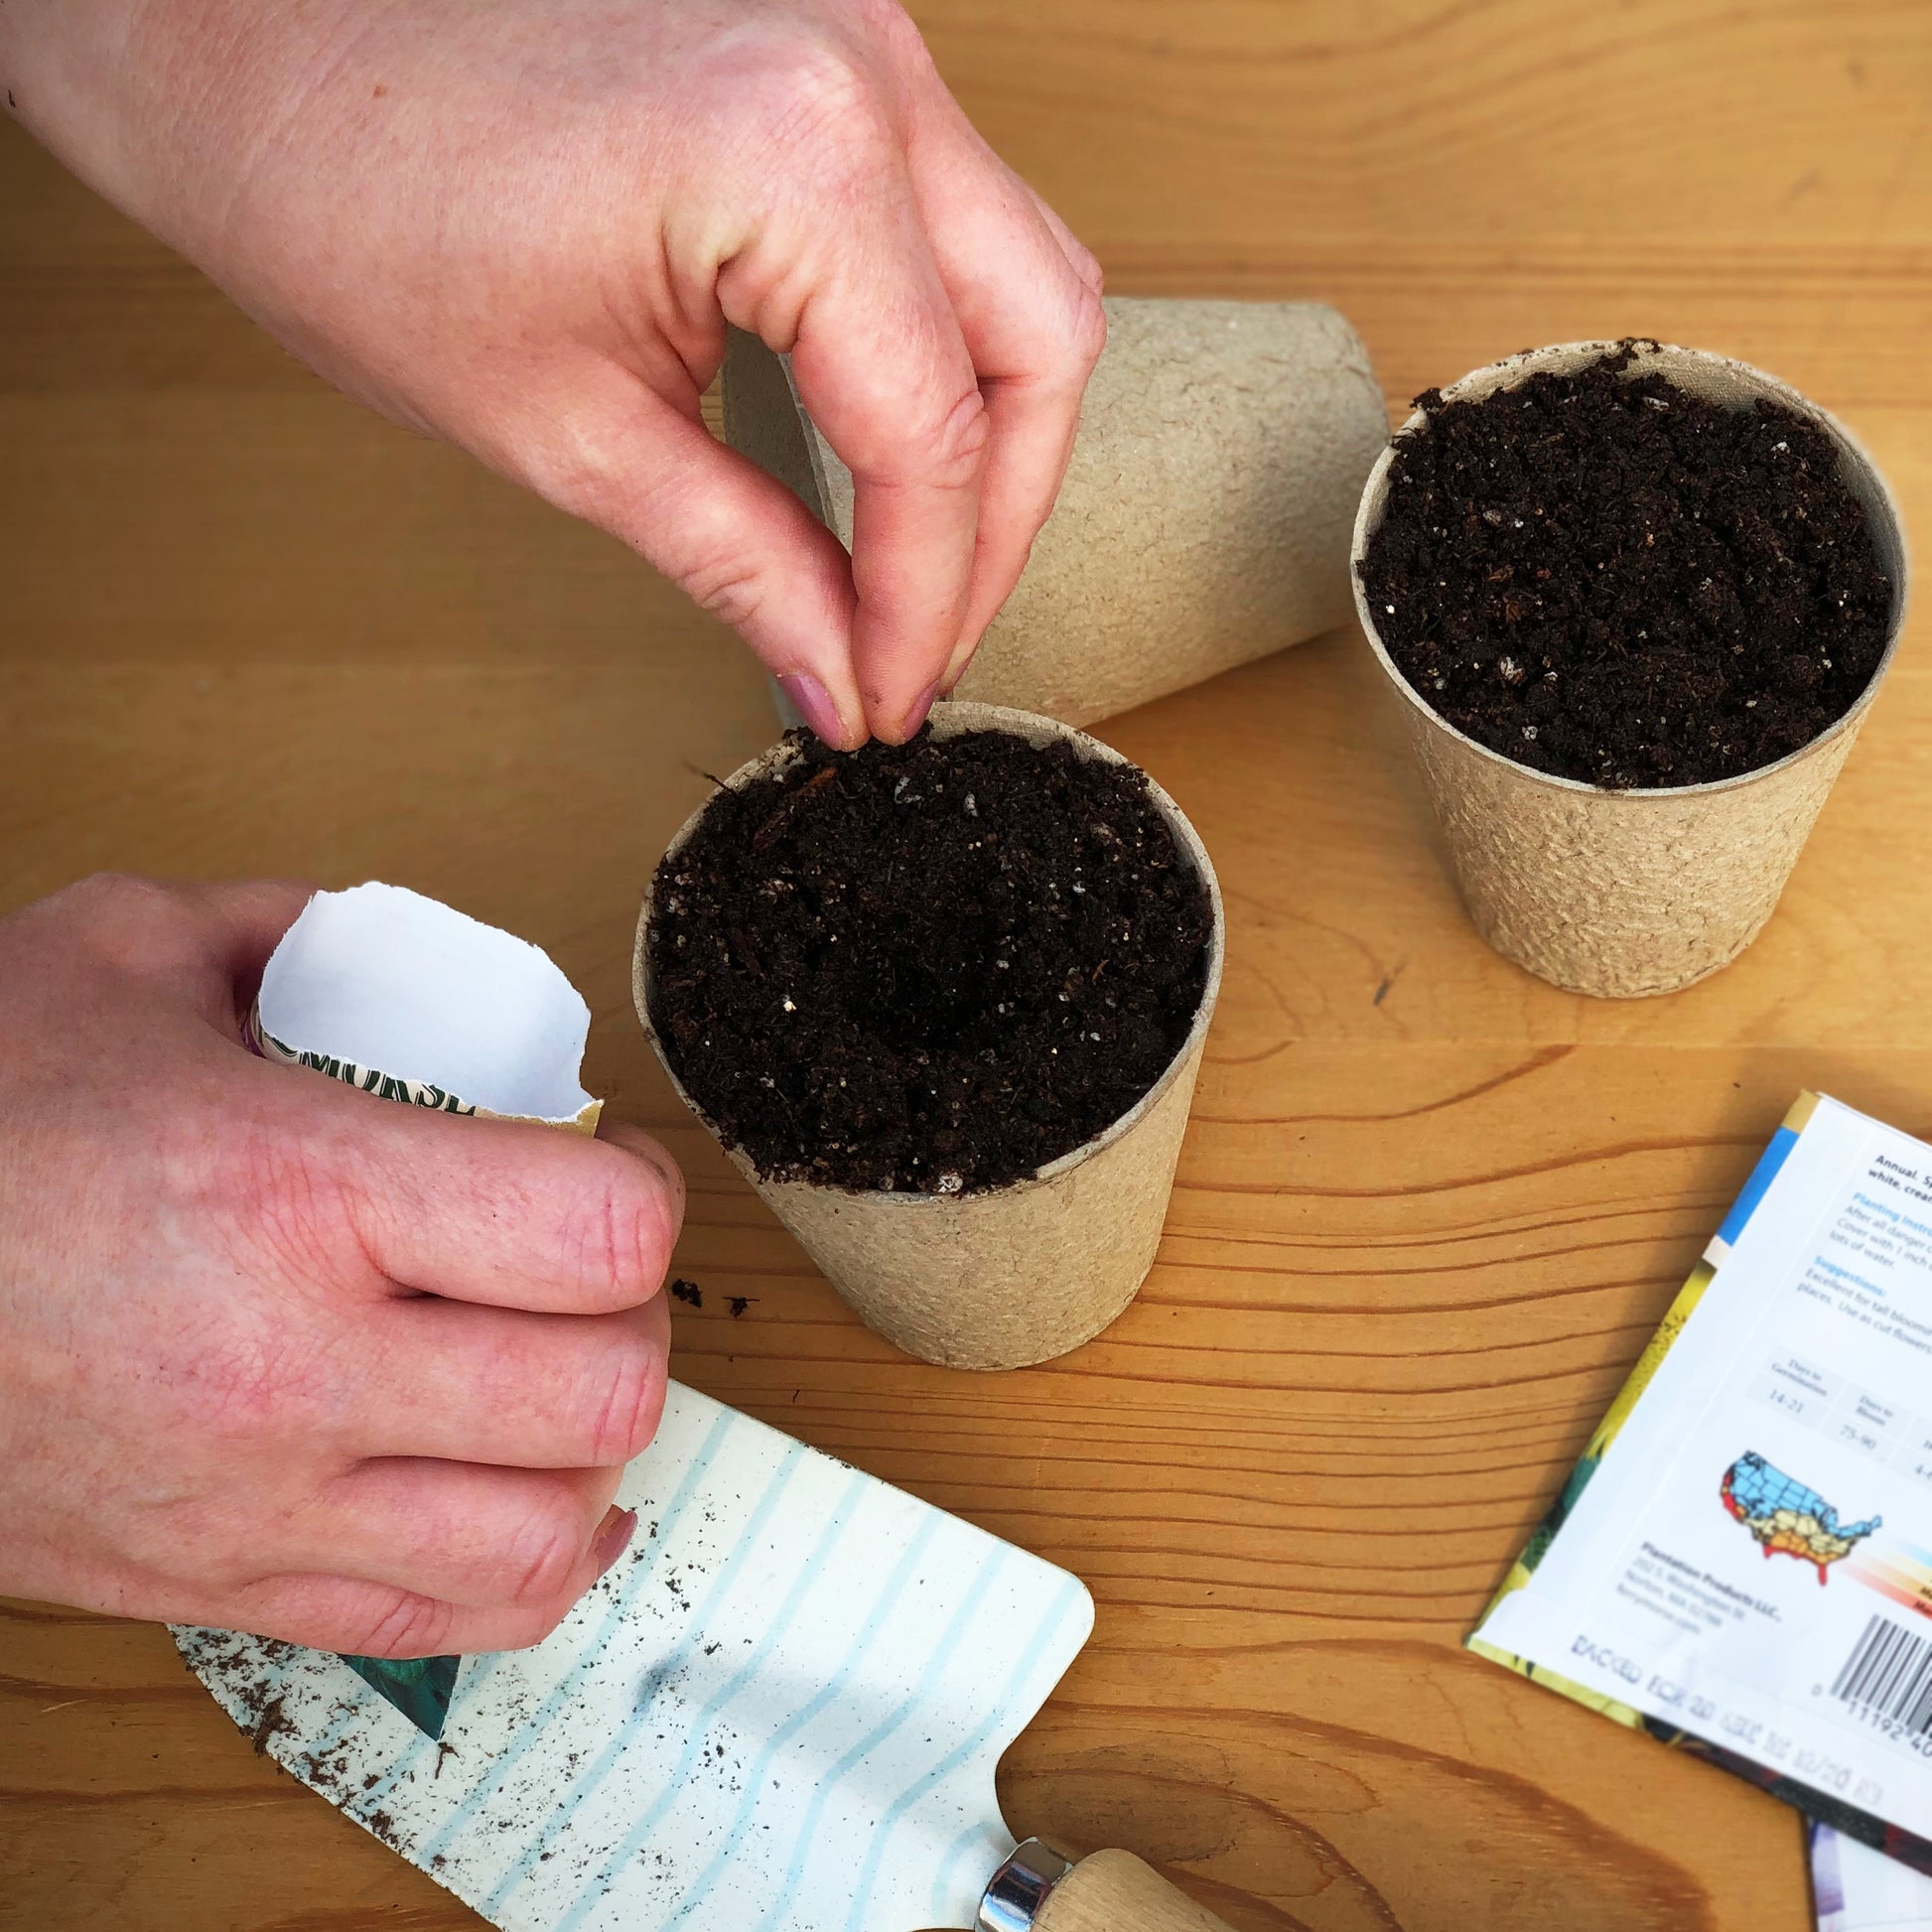 Start your Fordhook Zucchini Organic Squash seeds in biodegradable paper or peat pots for easy transplanting.